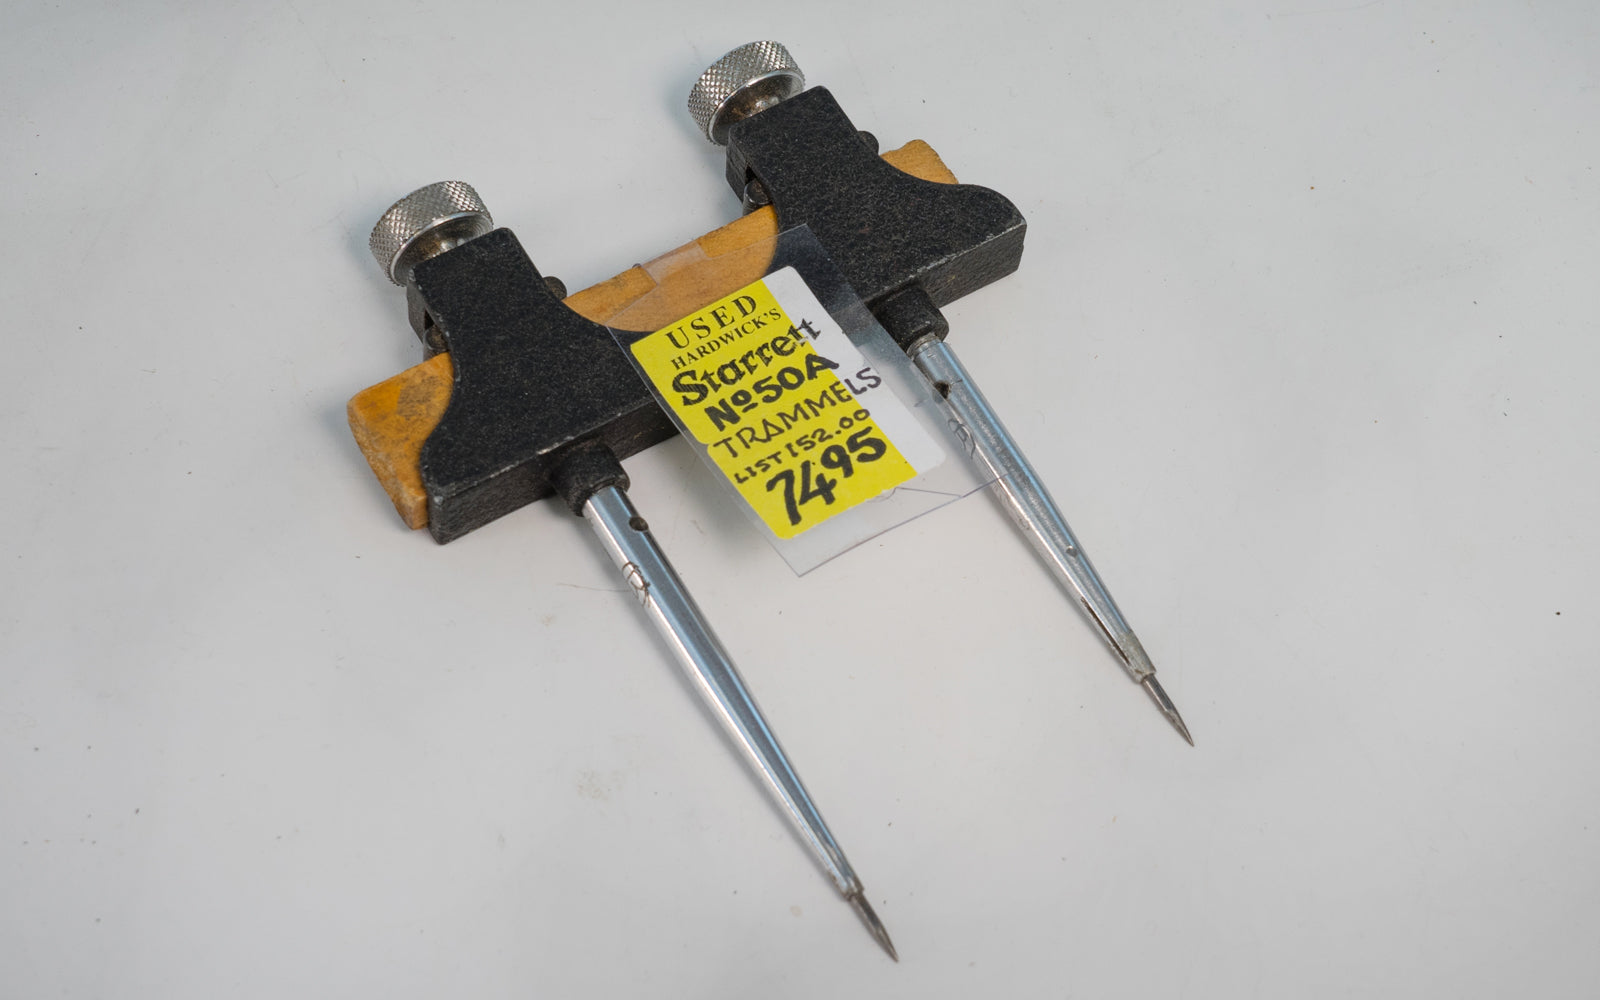 Starrett 50A Trammels - USED. Heads are die cast with black wrinkle finish & have hardened, forged steel divider points. The points screw into the heads. Model 50A. Used - Good condition - Initials of previous owner engraved on points. Made in USA.